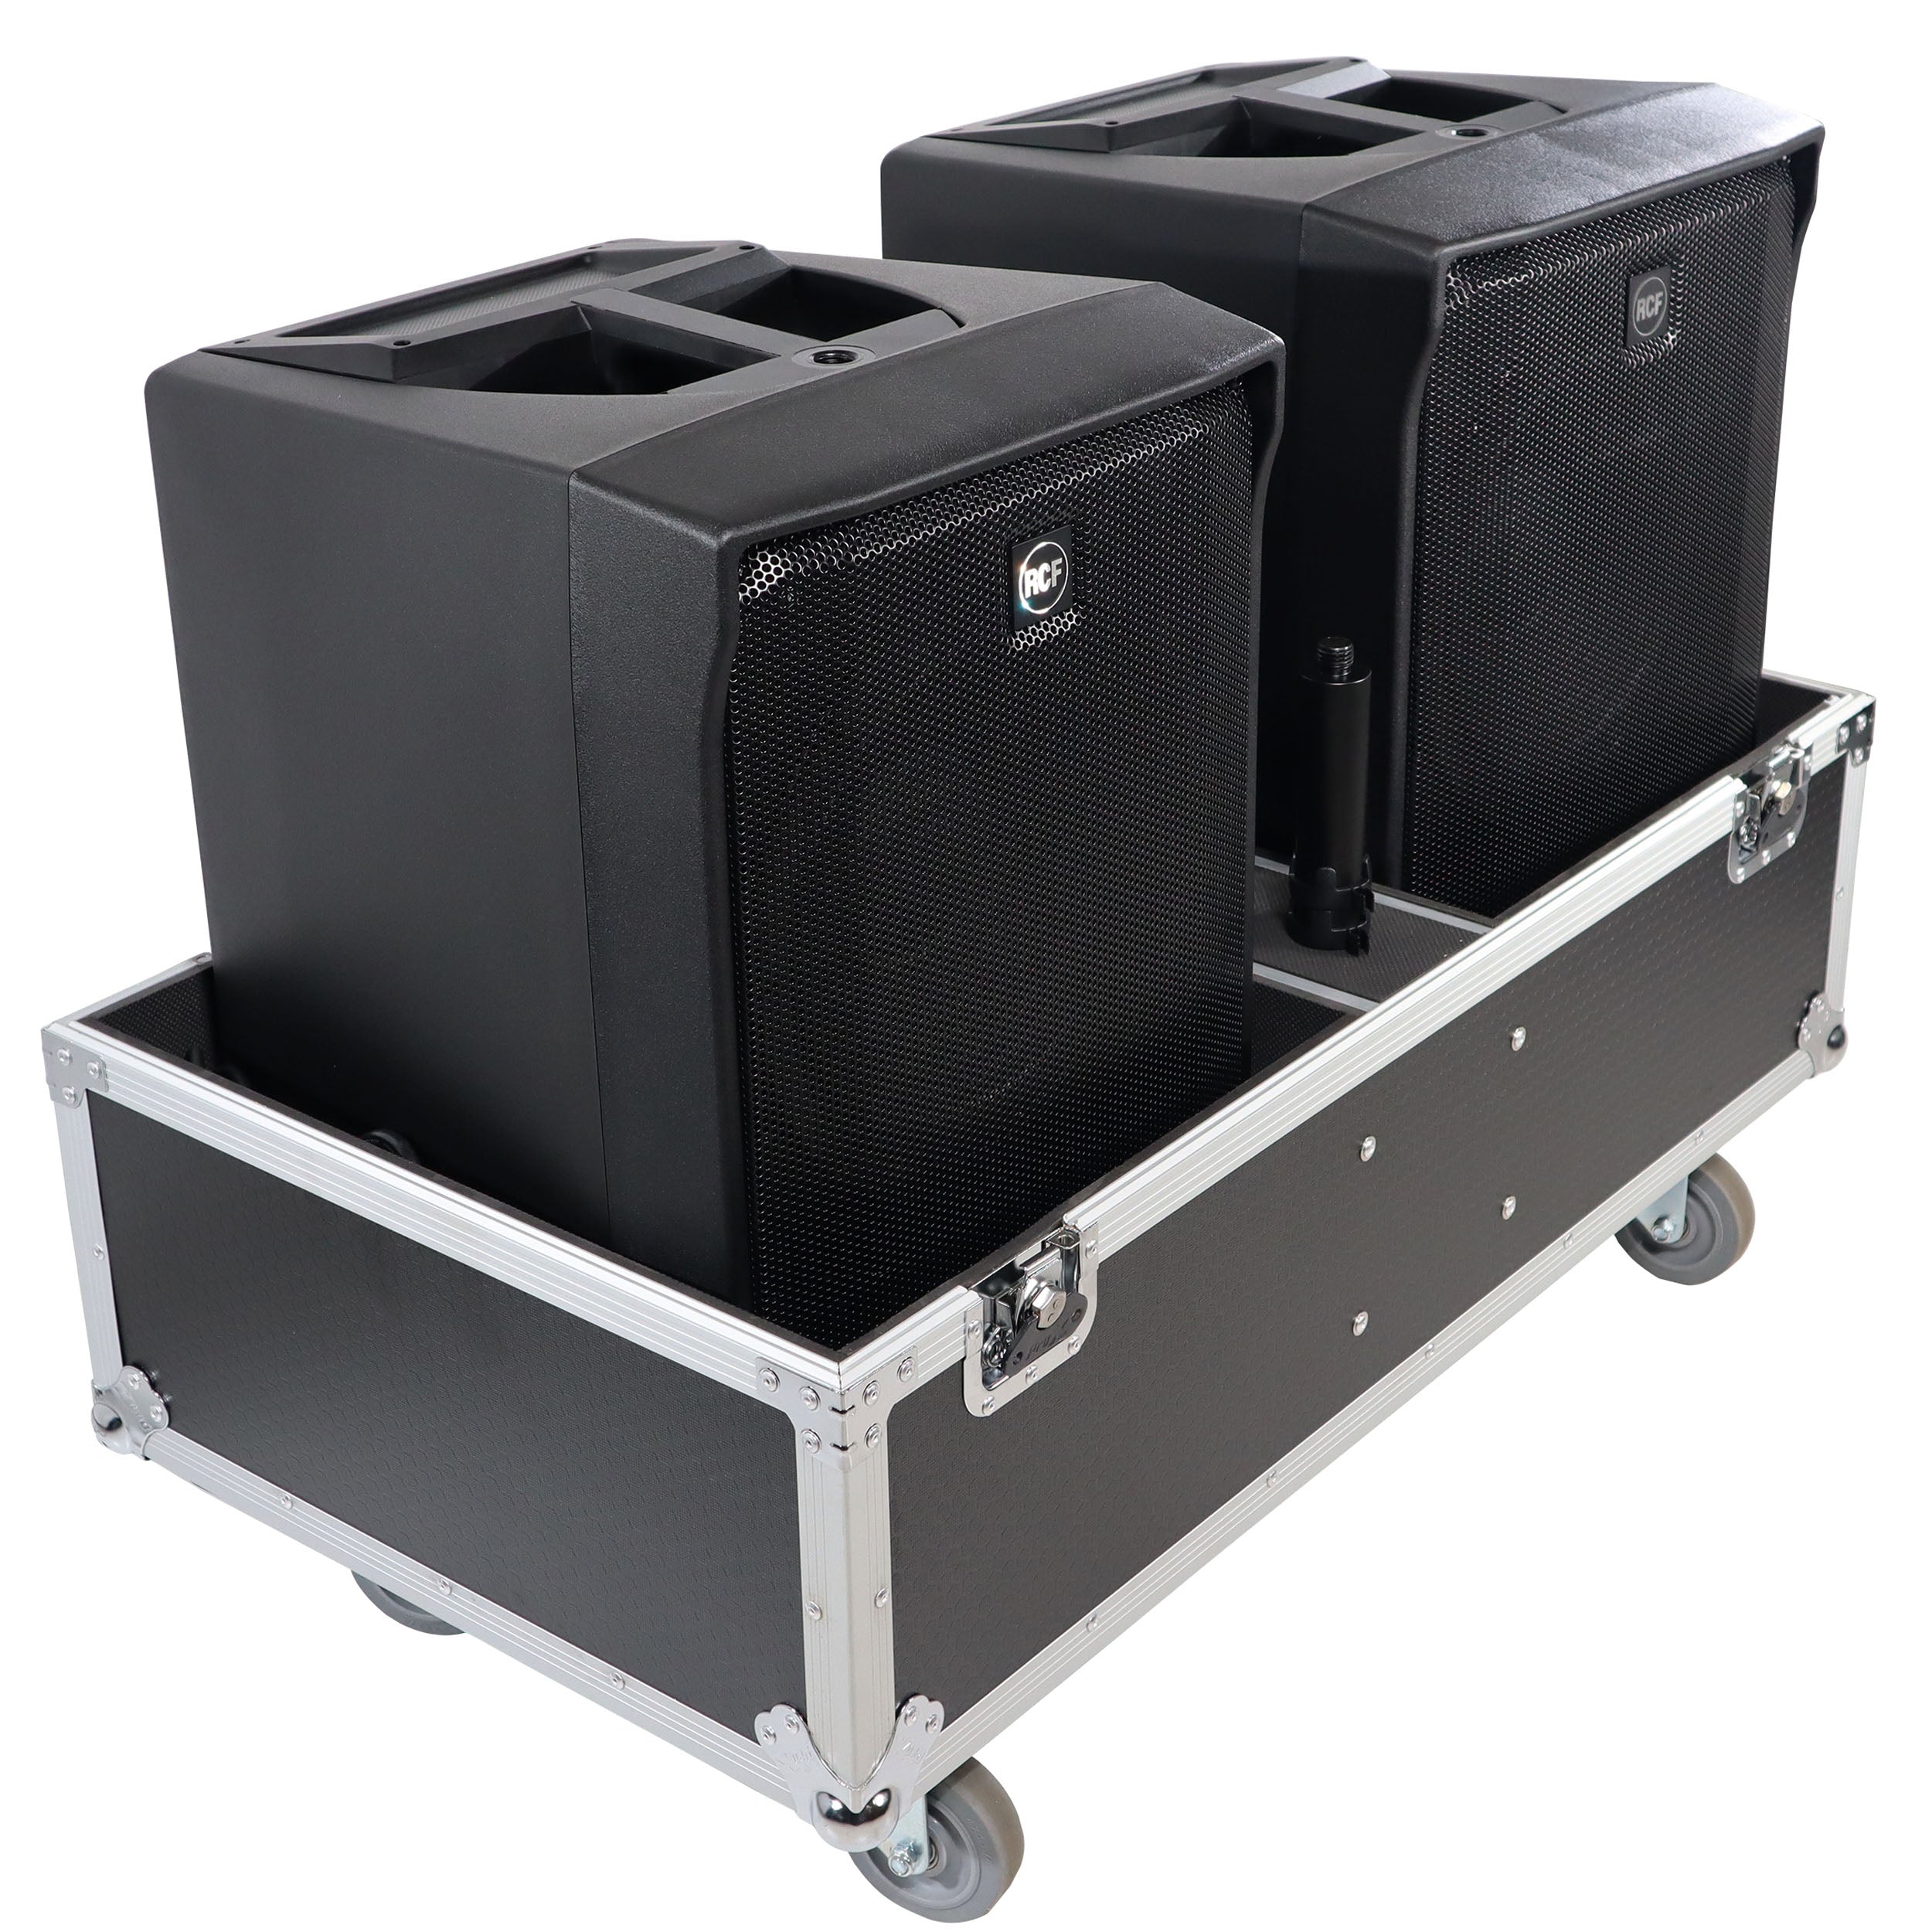 Pro X ATA Style Flight-Road Case For RCF EVOX 8 J8 JMIX8 Speaker Array System Fits Two Speakers and Subs X-RCF-EVOX8J8X2W